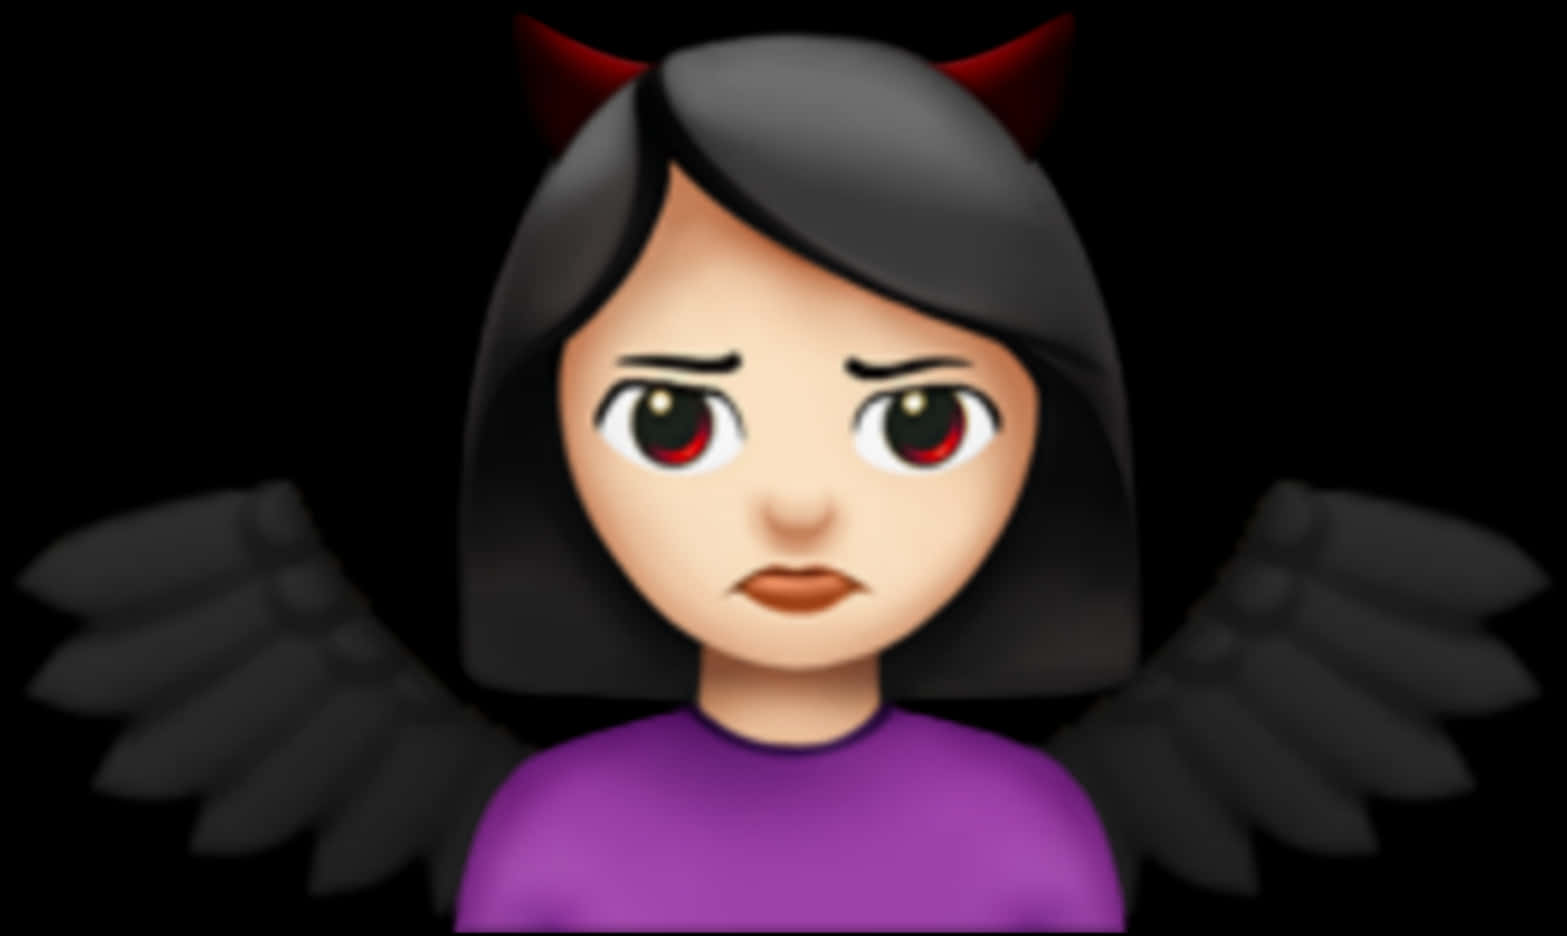 A Cartoon Of A Girl With Horns And Wings